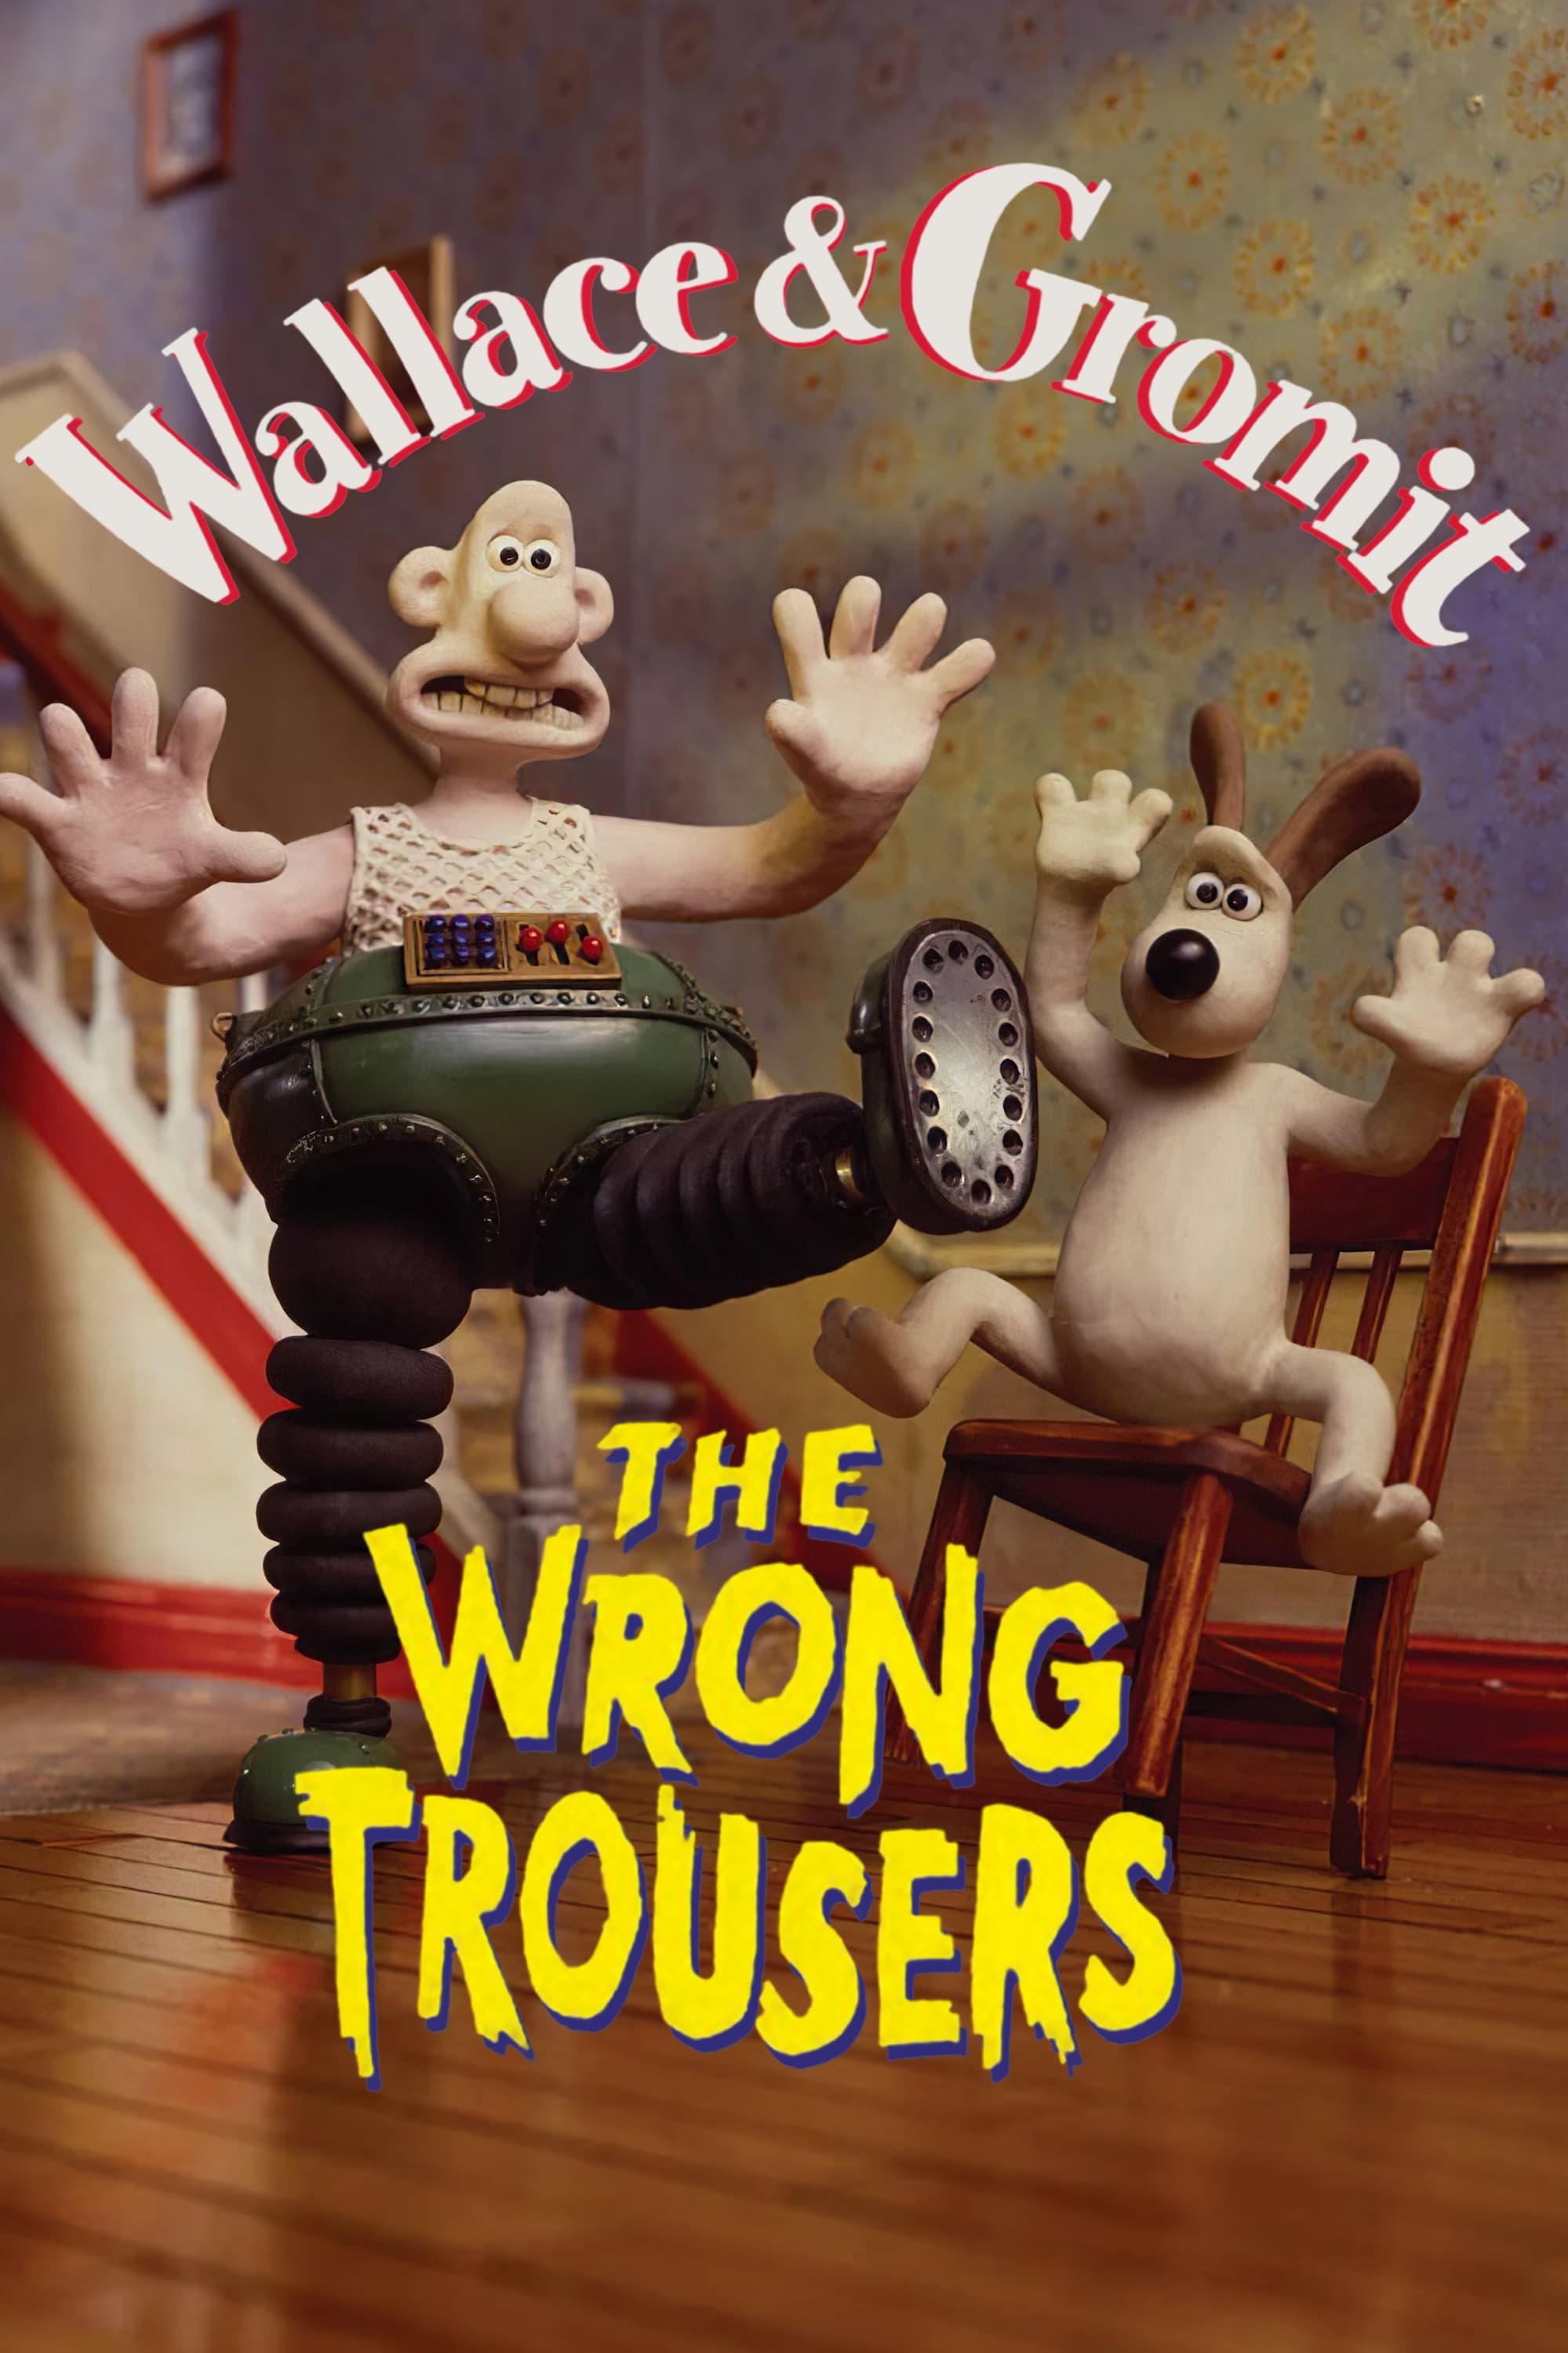 Banner Phim Wallace và Gromit - Chiếc Quần Rắc Rối (The Wrong Trousers)